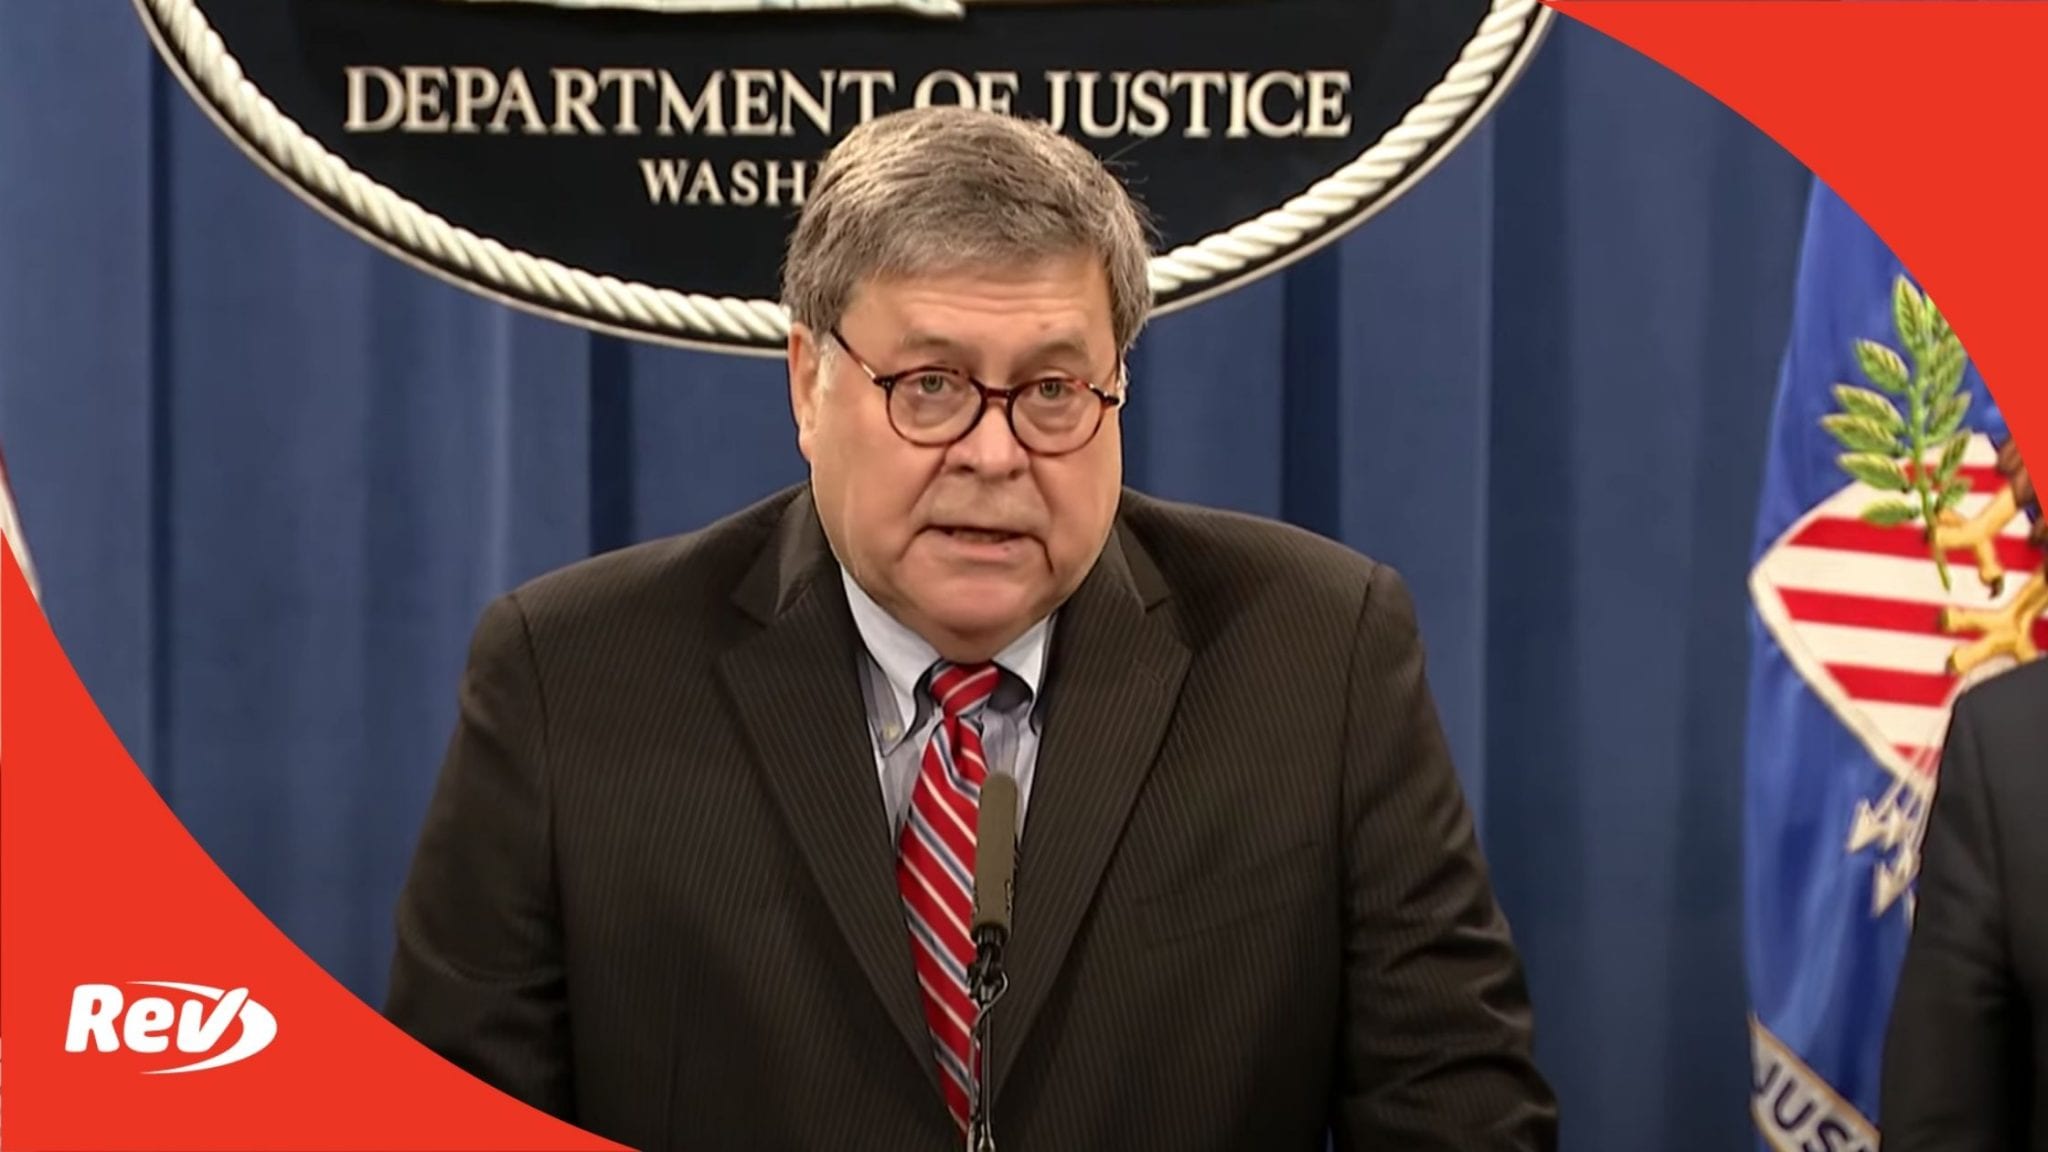 Bill Barr Press Conference Transcript: No Special Counsels Needed to Investigate Election or Hunter Biden